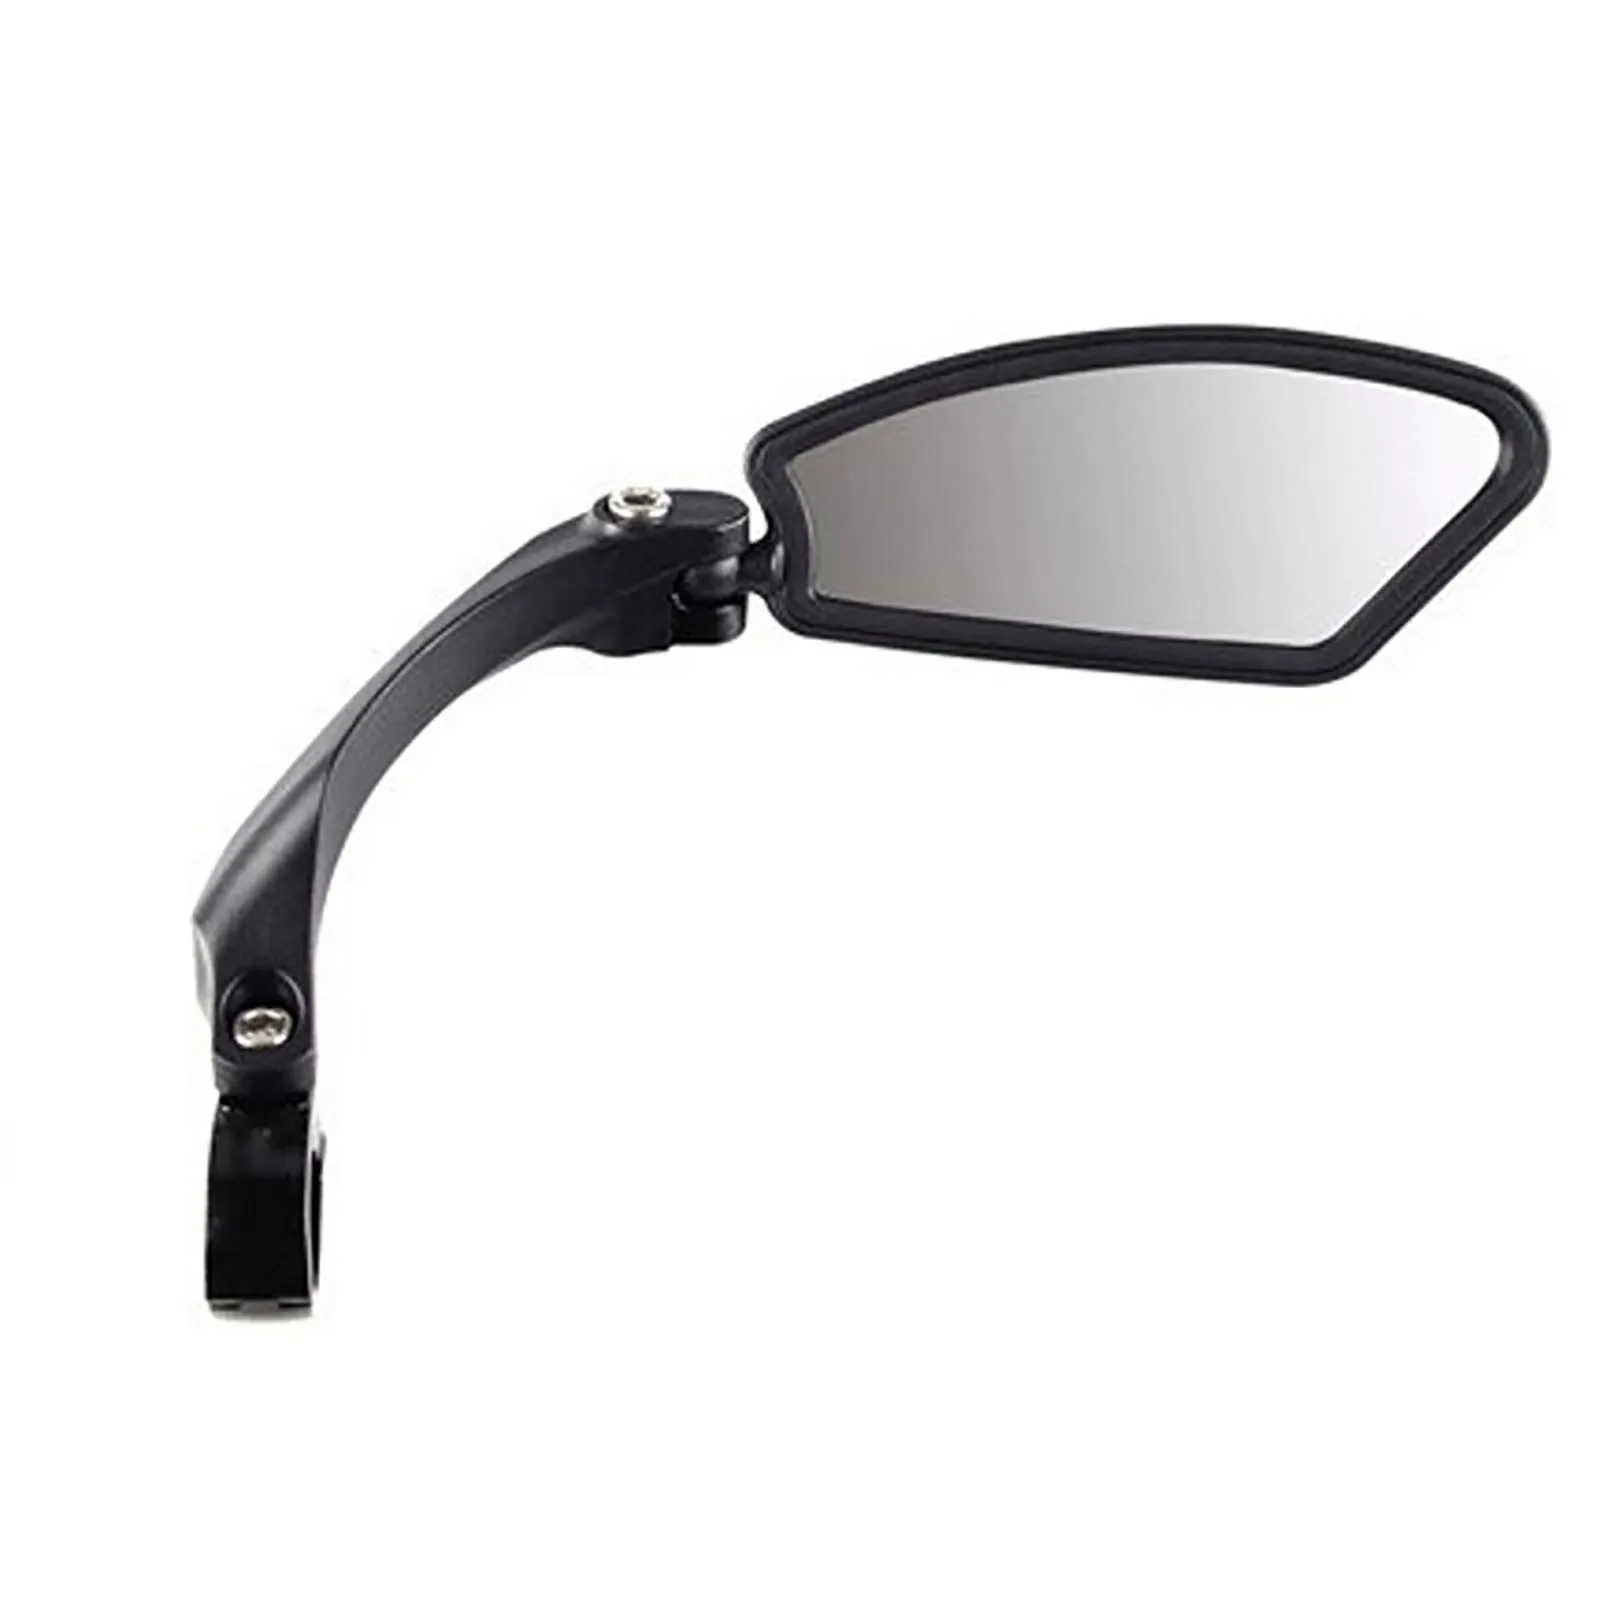 Bicycle Rear View Mirror Cycling Range Back Sight Left Right HD MirrorsC... - $115.29